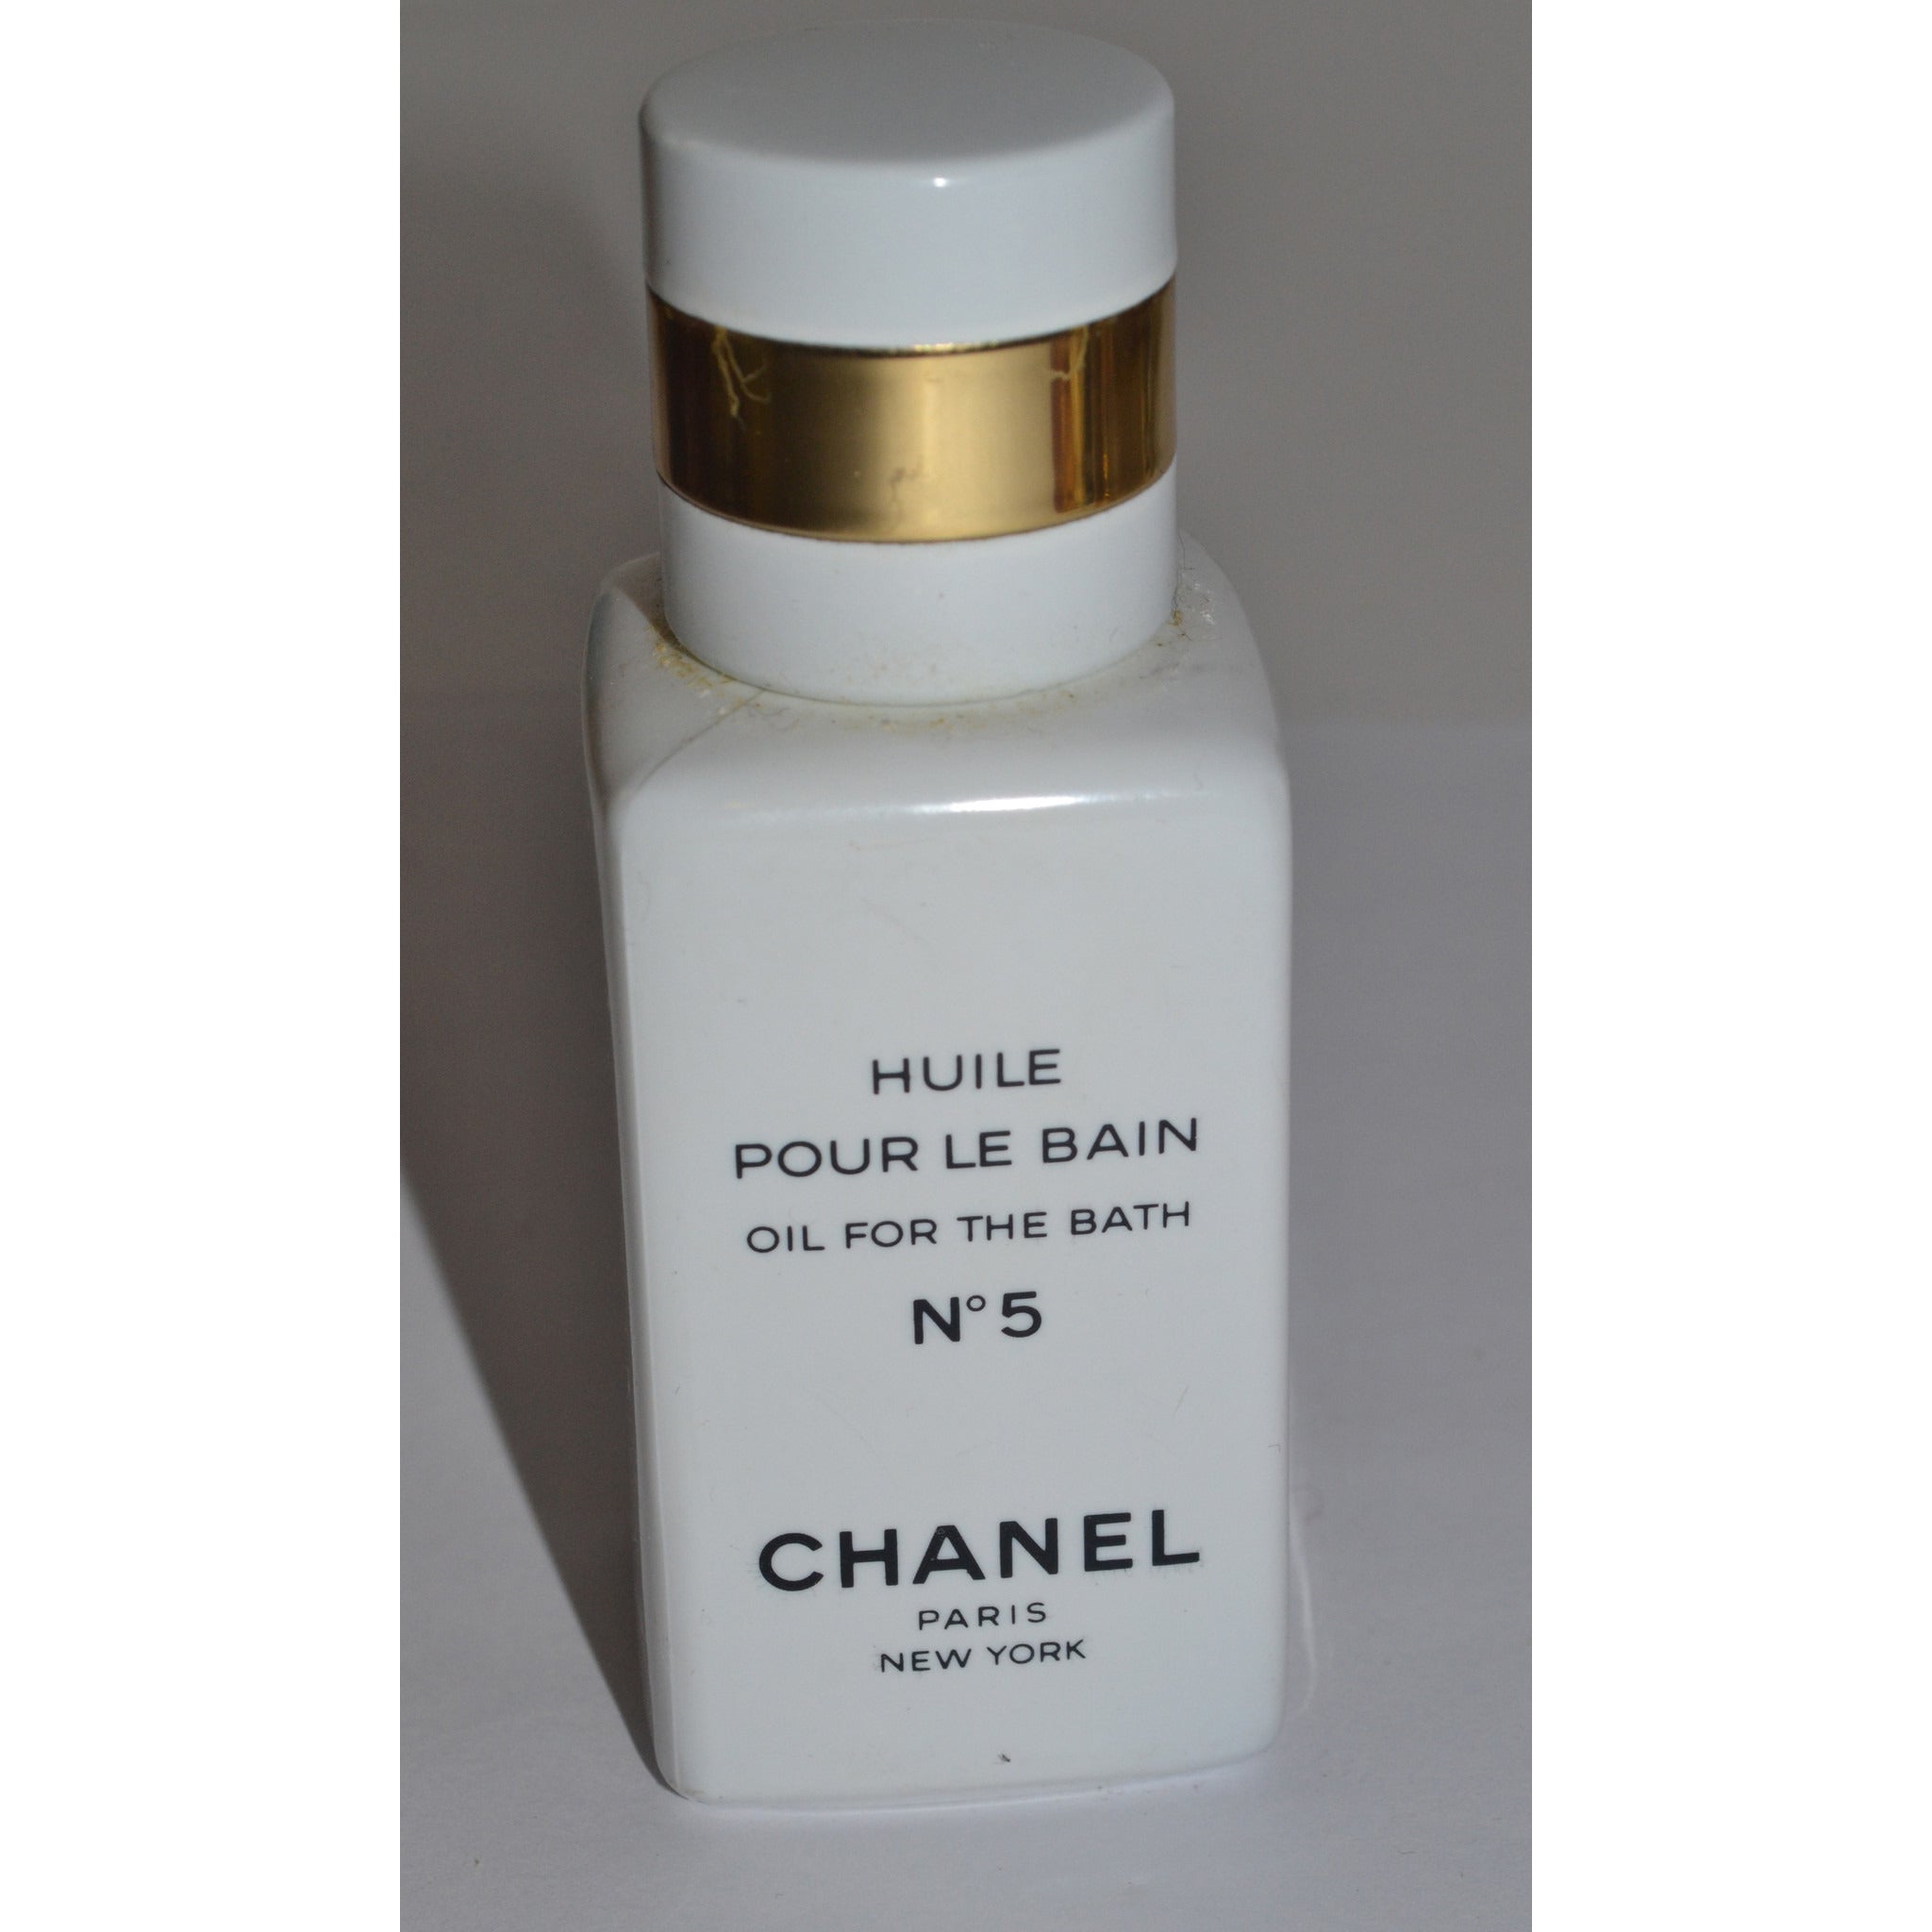 Chanel No 5 Bath Oil – Quirky Finds